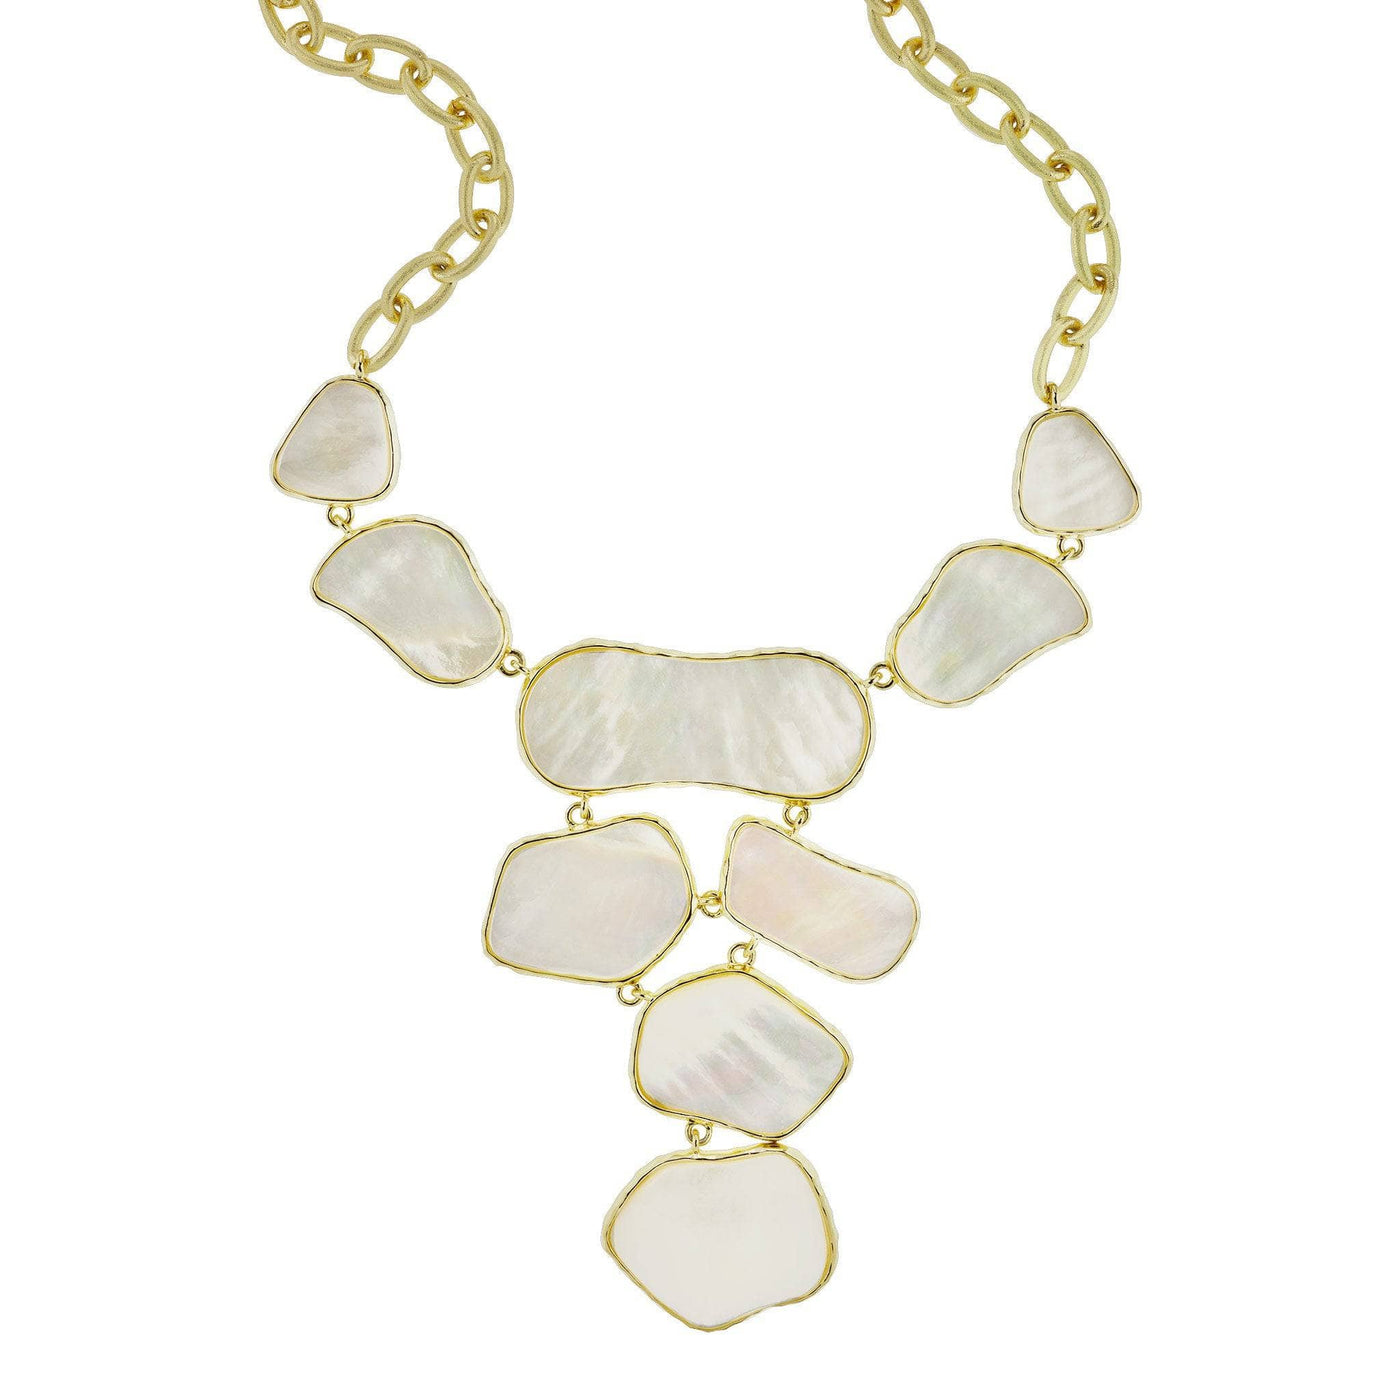 Harlow & Dylan by HEIDI DAUS®"Waves" White Mother of Pearl Statement Necklace